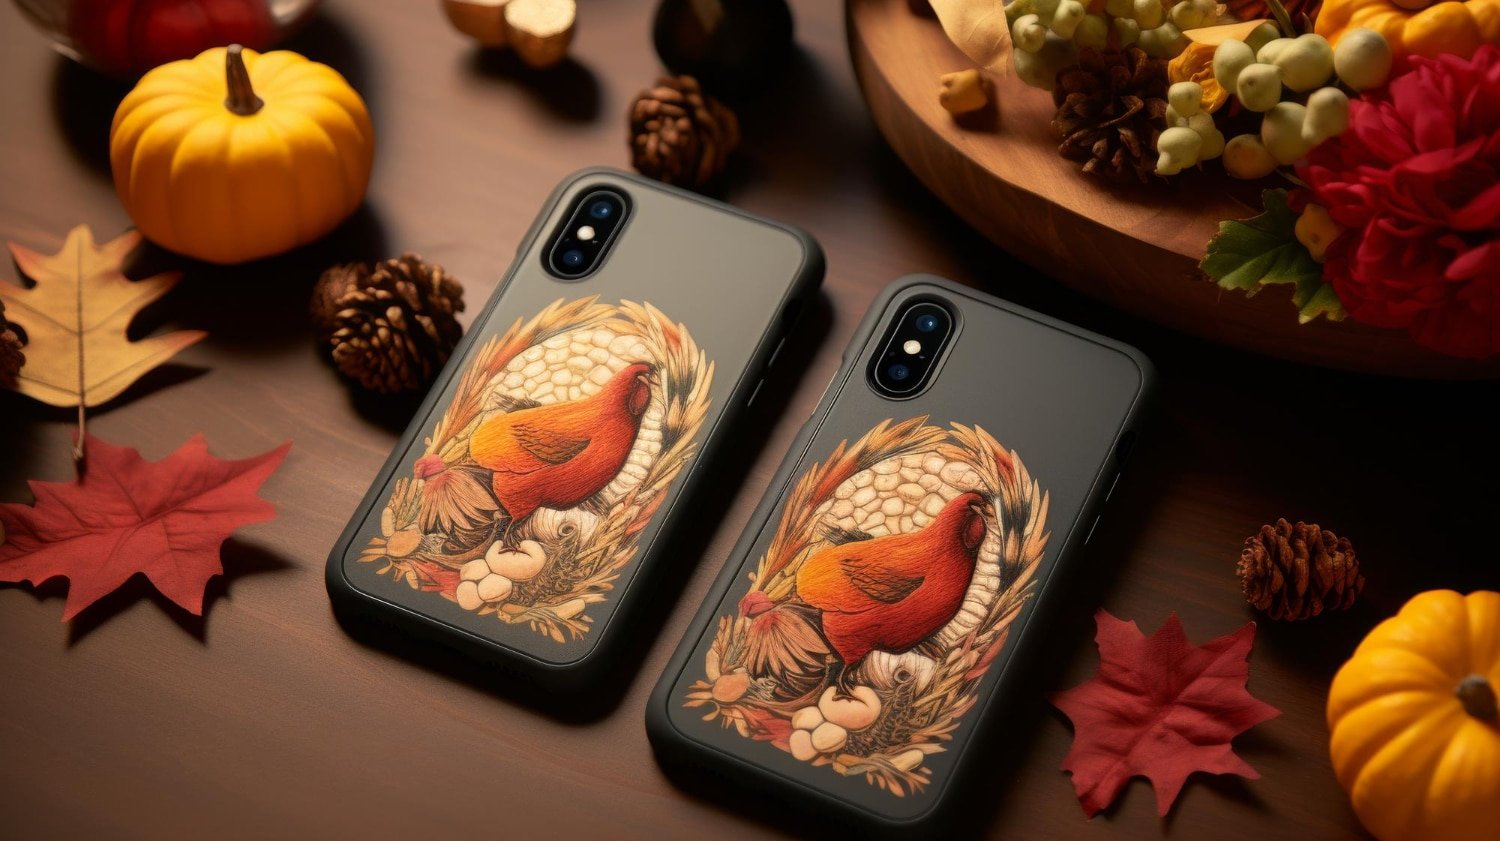 Protect Your Mobile Devices Stylishly With Case-Mate’s Fashionable Phone Cases